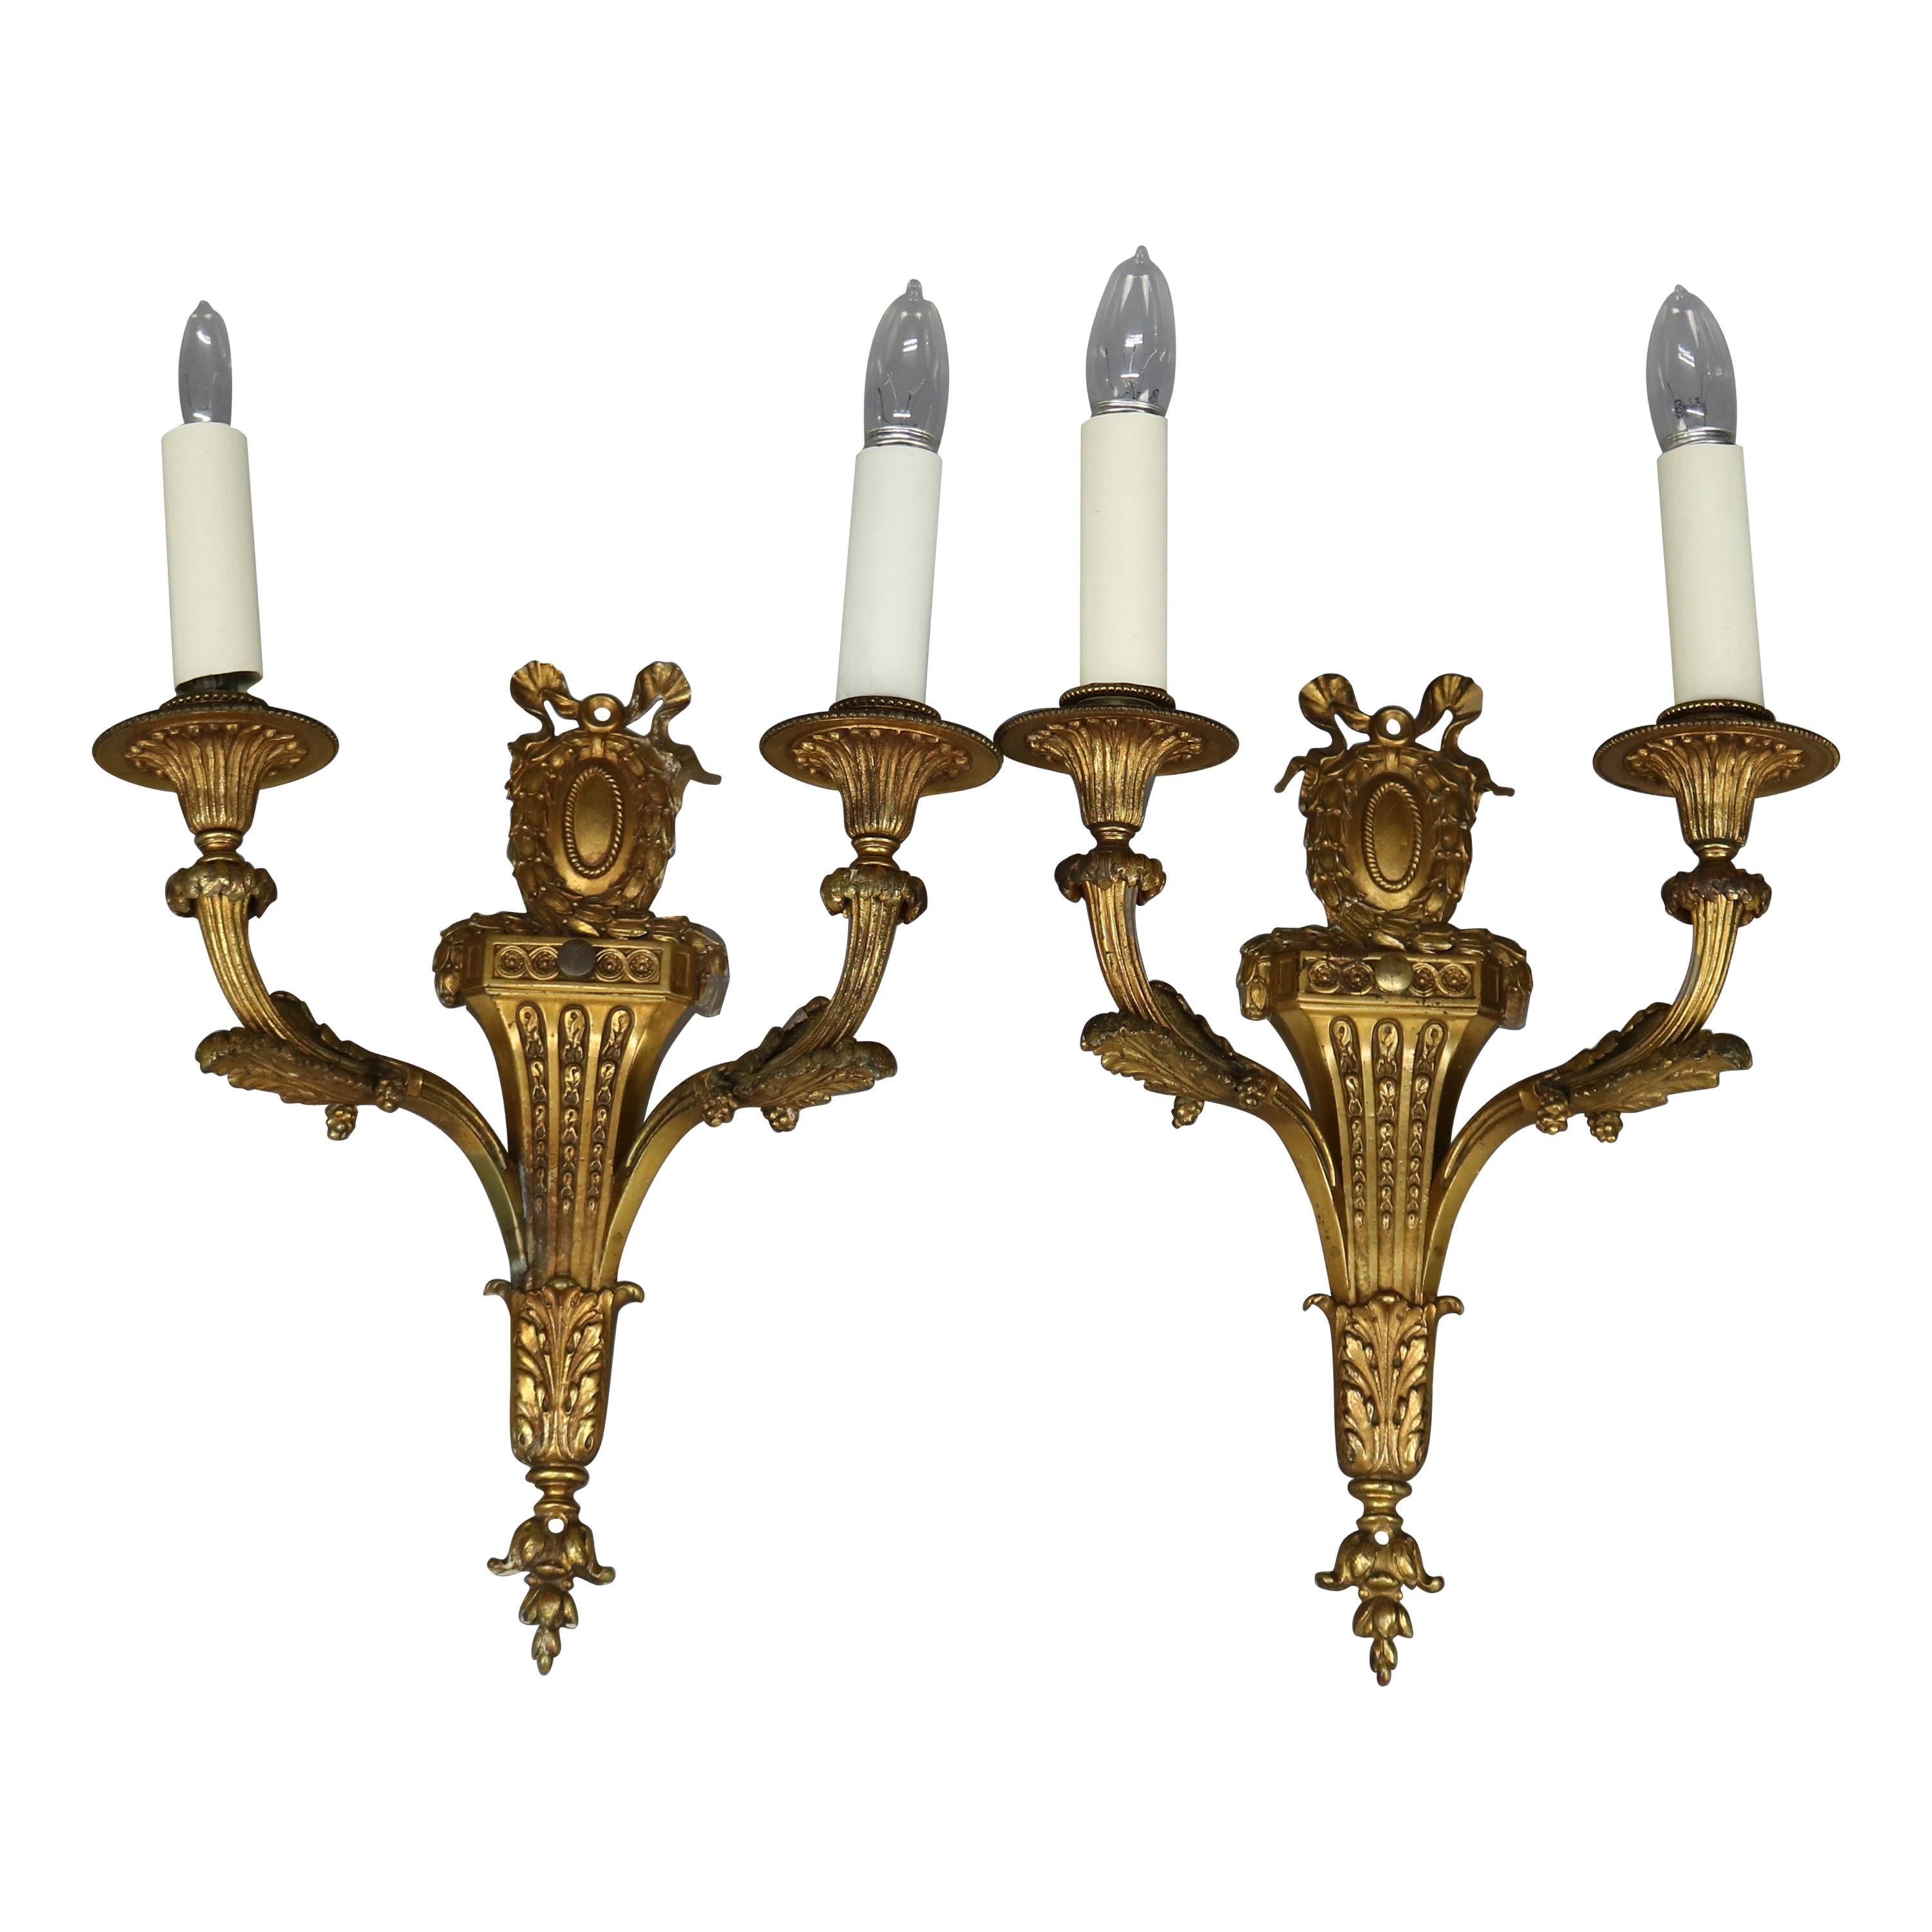 Antique Pair of French Empire Gilt Bronze Torchiere Wall Sconces, 20th Century